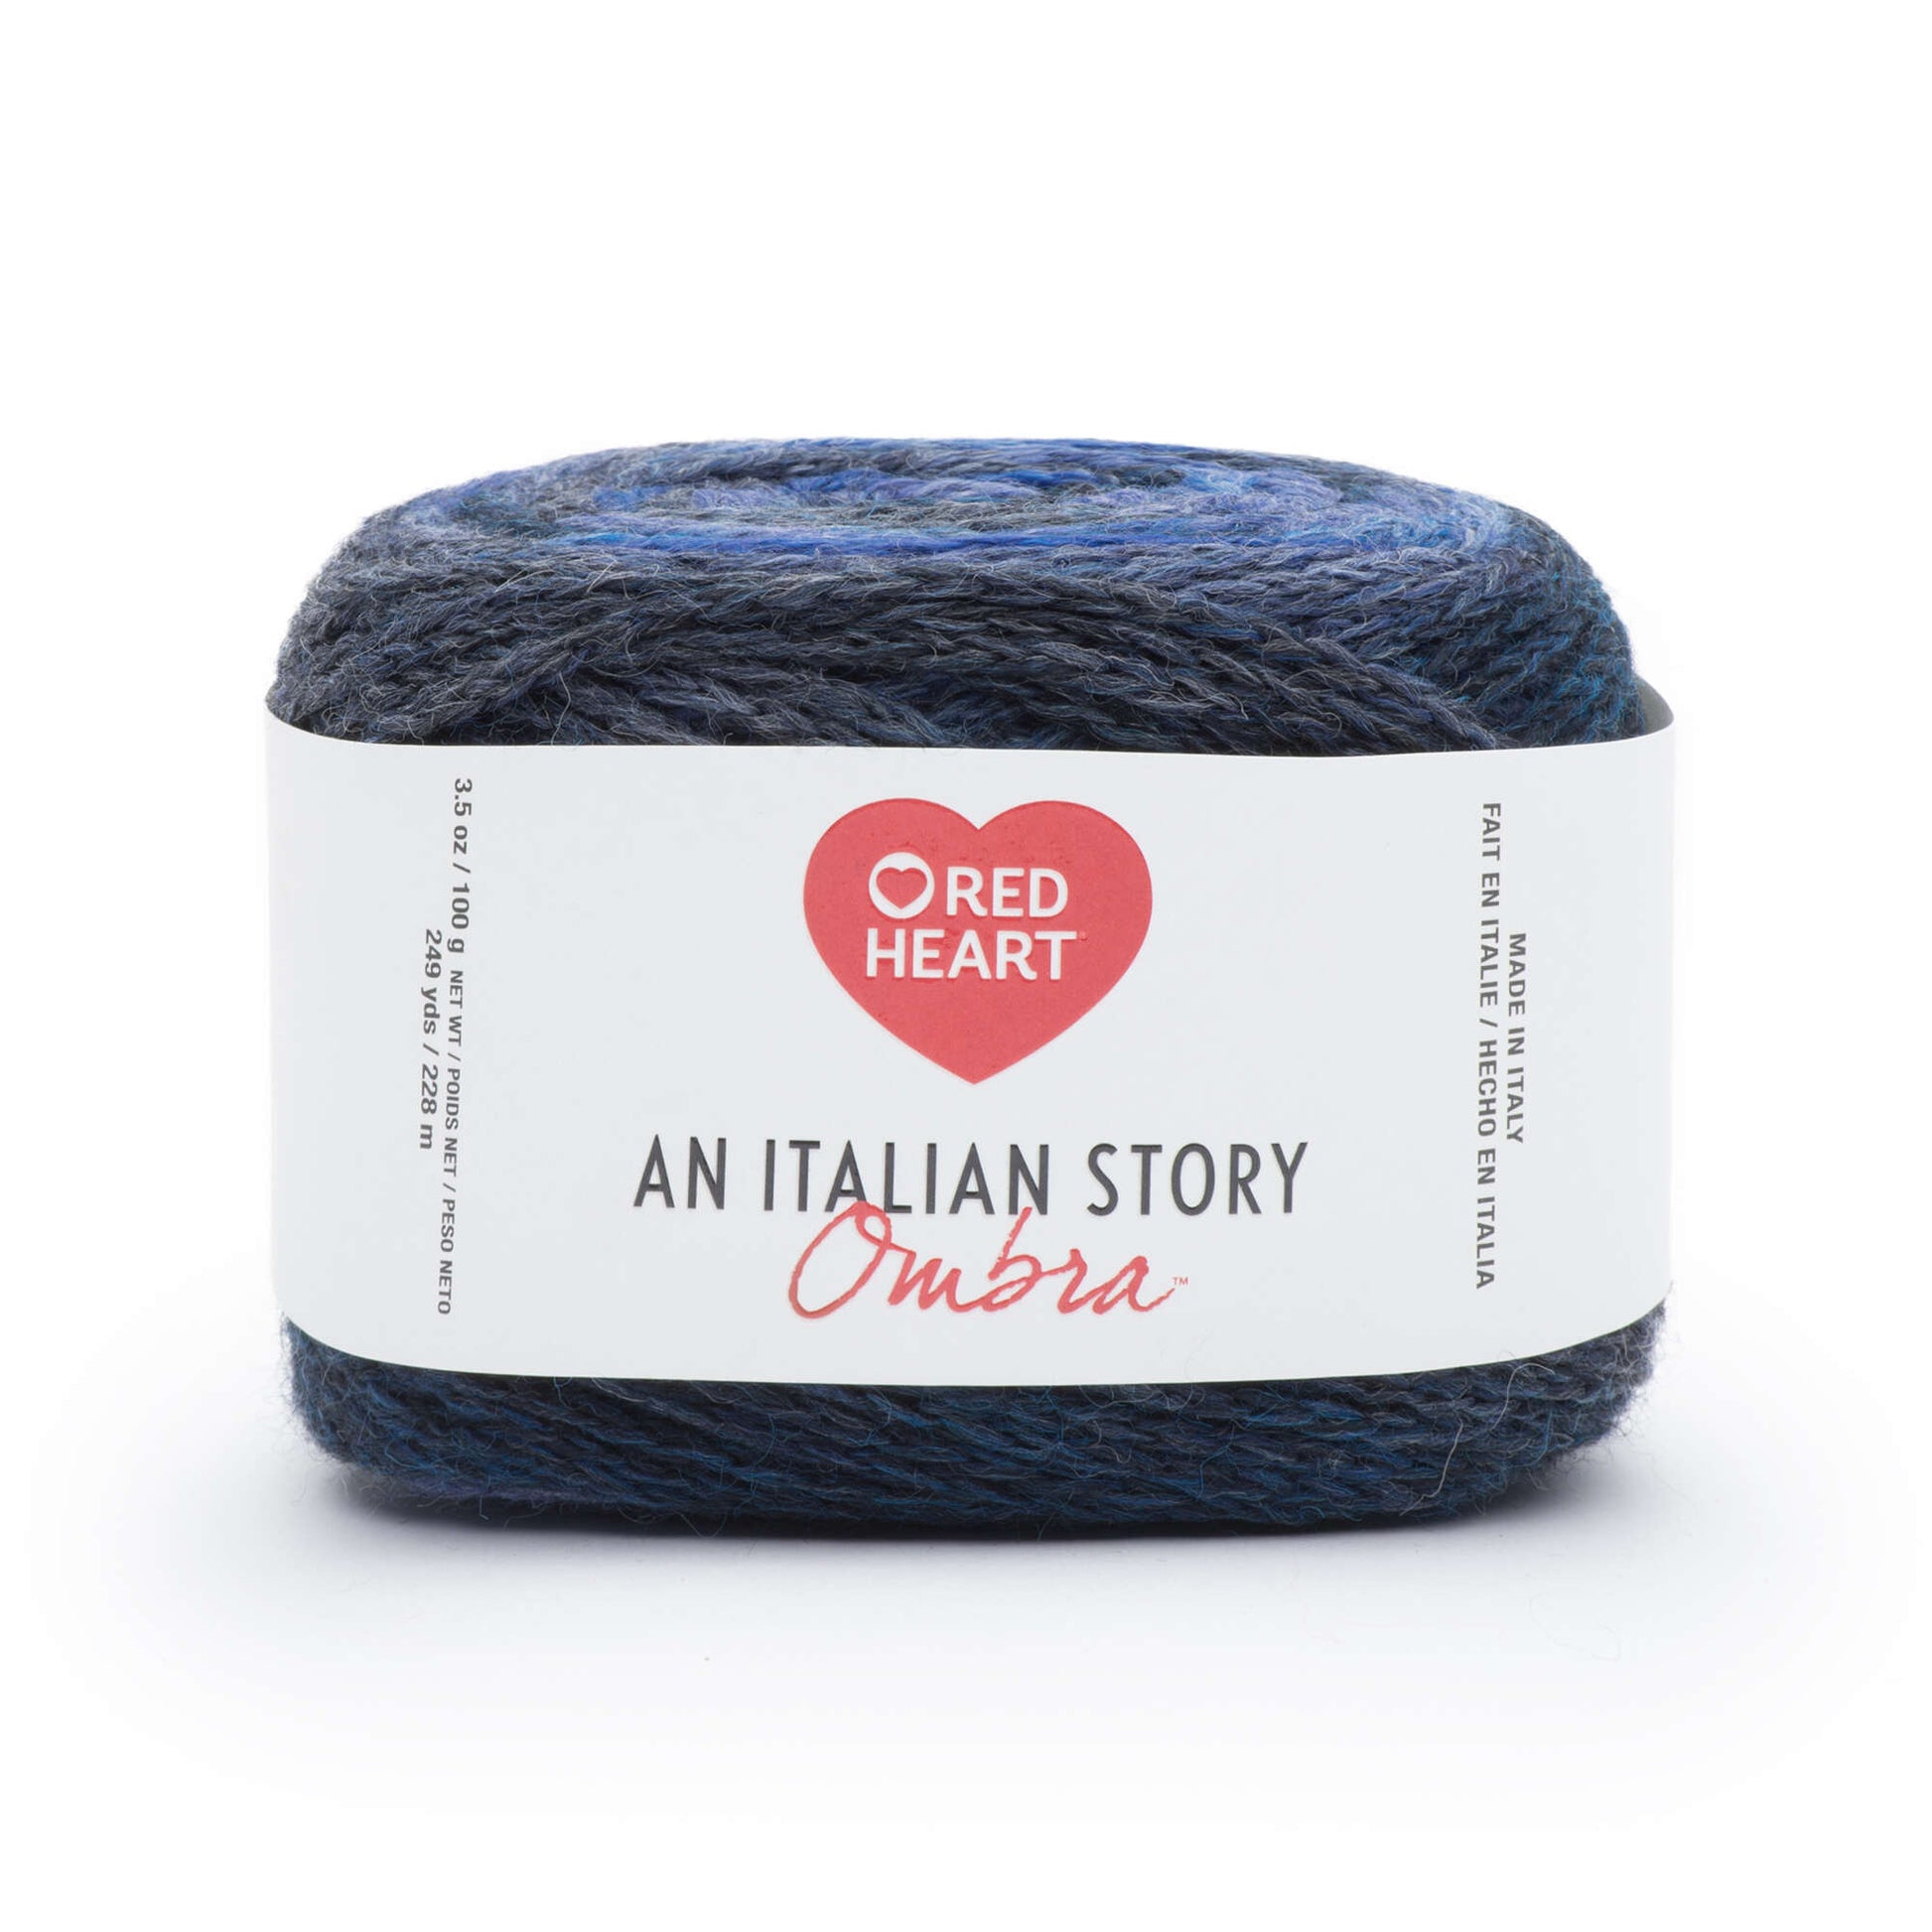 Red Heart An Italian Story Ombra Yarn - Discontinued Shades